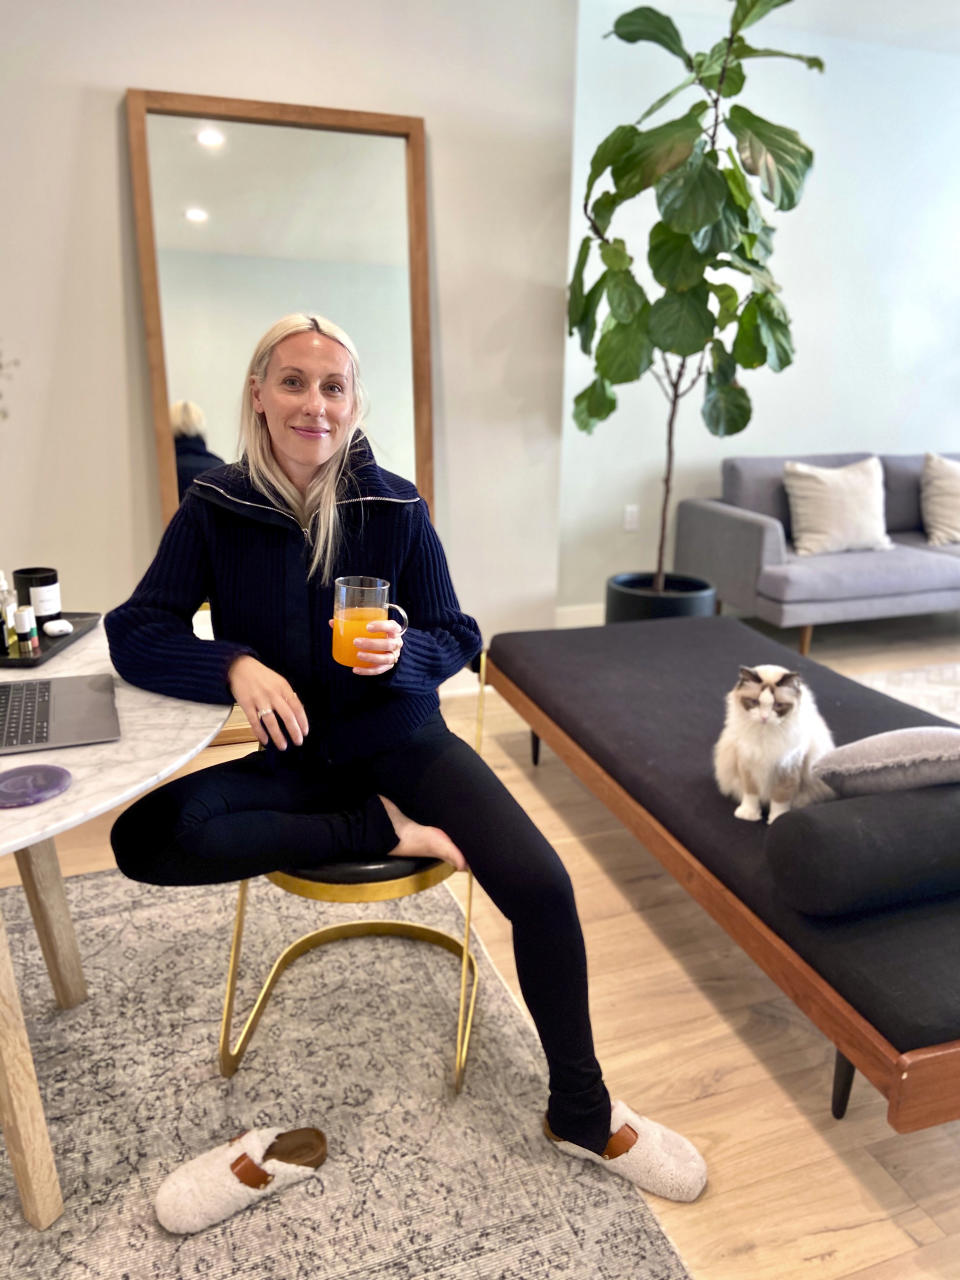 In this April 5, 2020 photo, Goop fashion director Ali Pew is poses in Los Angeles. After weeks stuck in isolation, bodies molded into beds and couches glued to TVs and computers, with little to delineate weekends from weekdays, a pronounced fashion trend is emerging in loungewear. It's comfy, everyday clothing with a bit more refinement, unfussy, minimal, but pulled together enough for a zoom conference call with your boss. (Oliver Clark via AP)